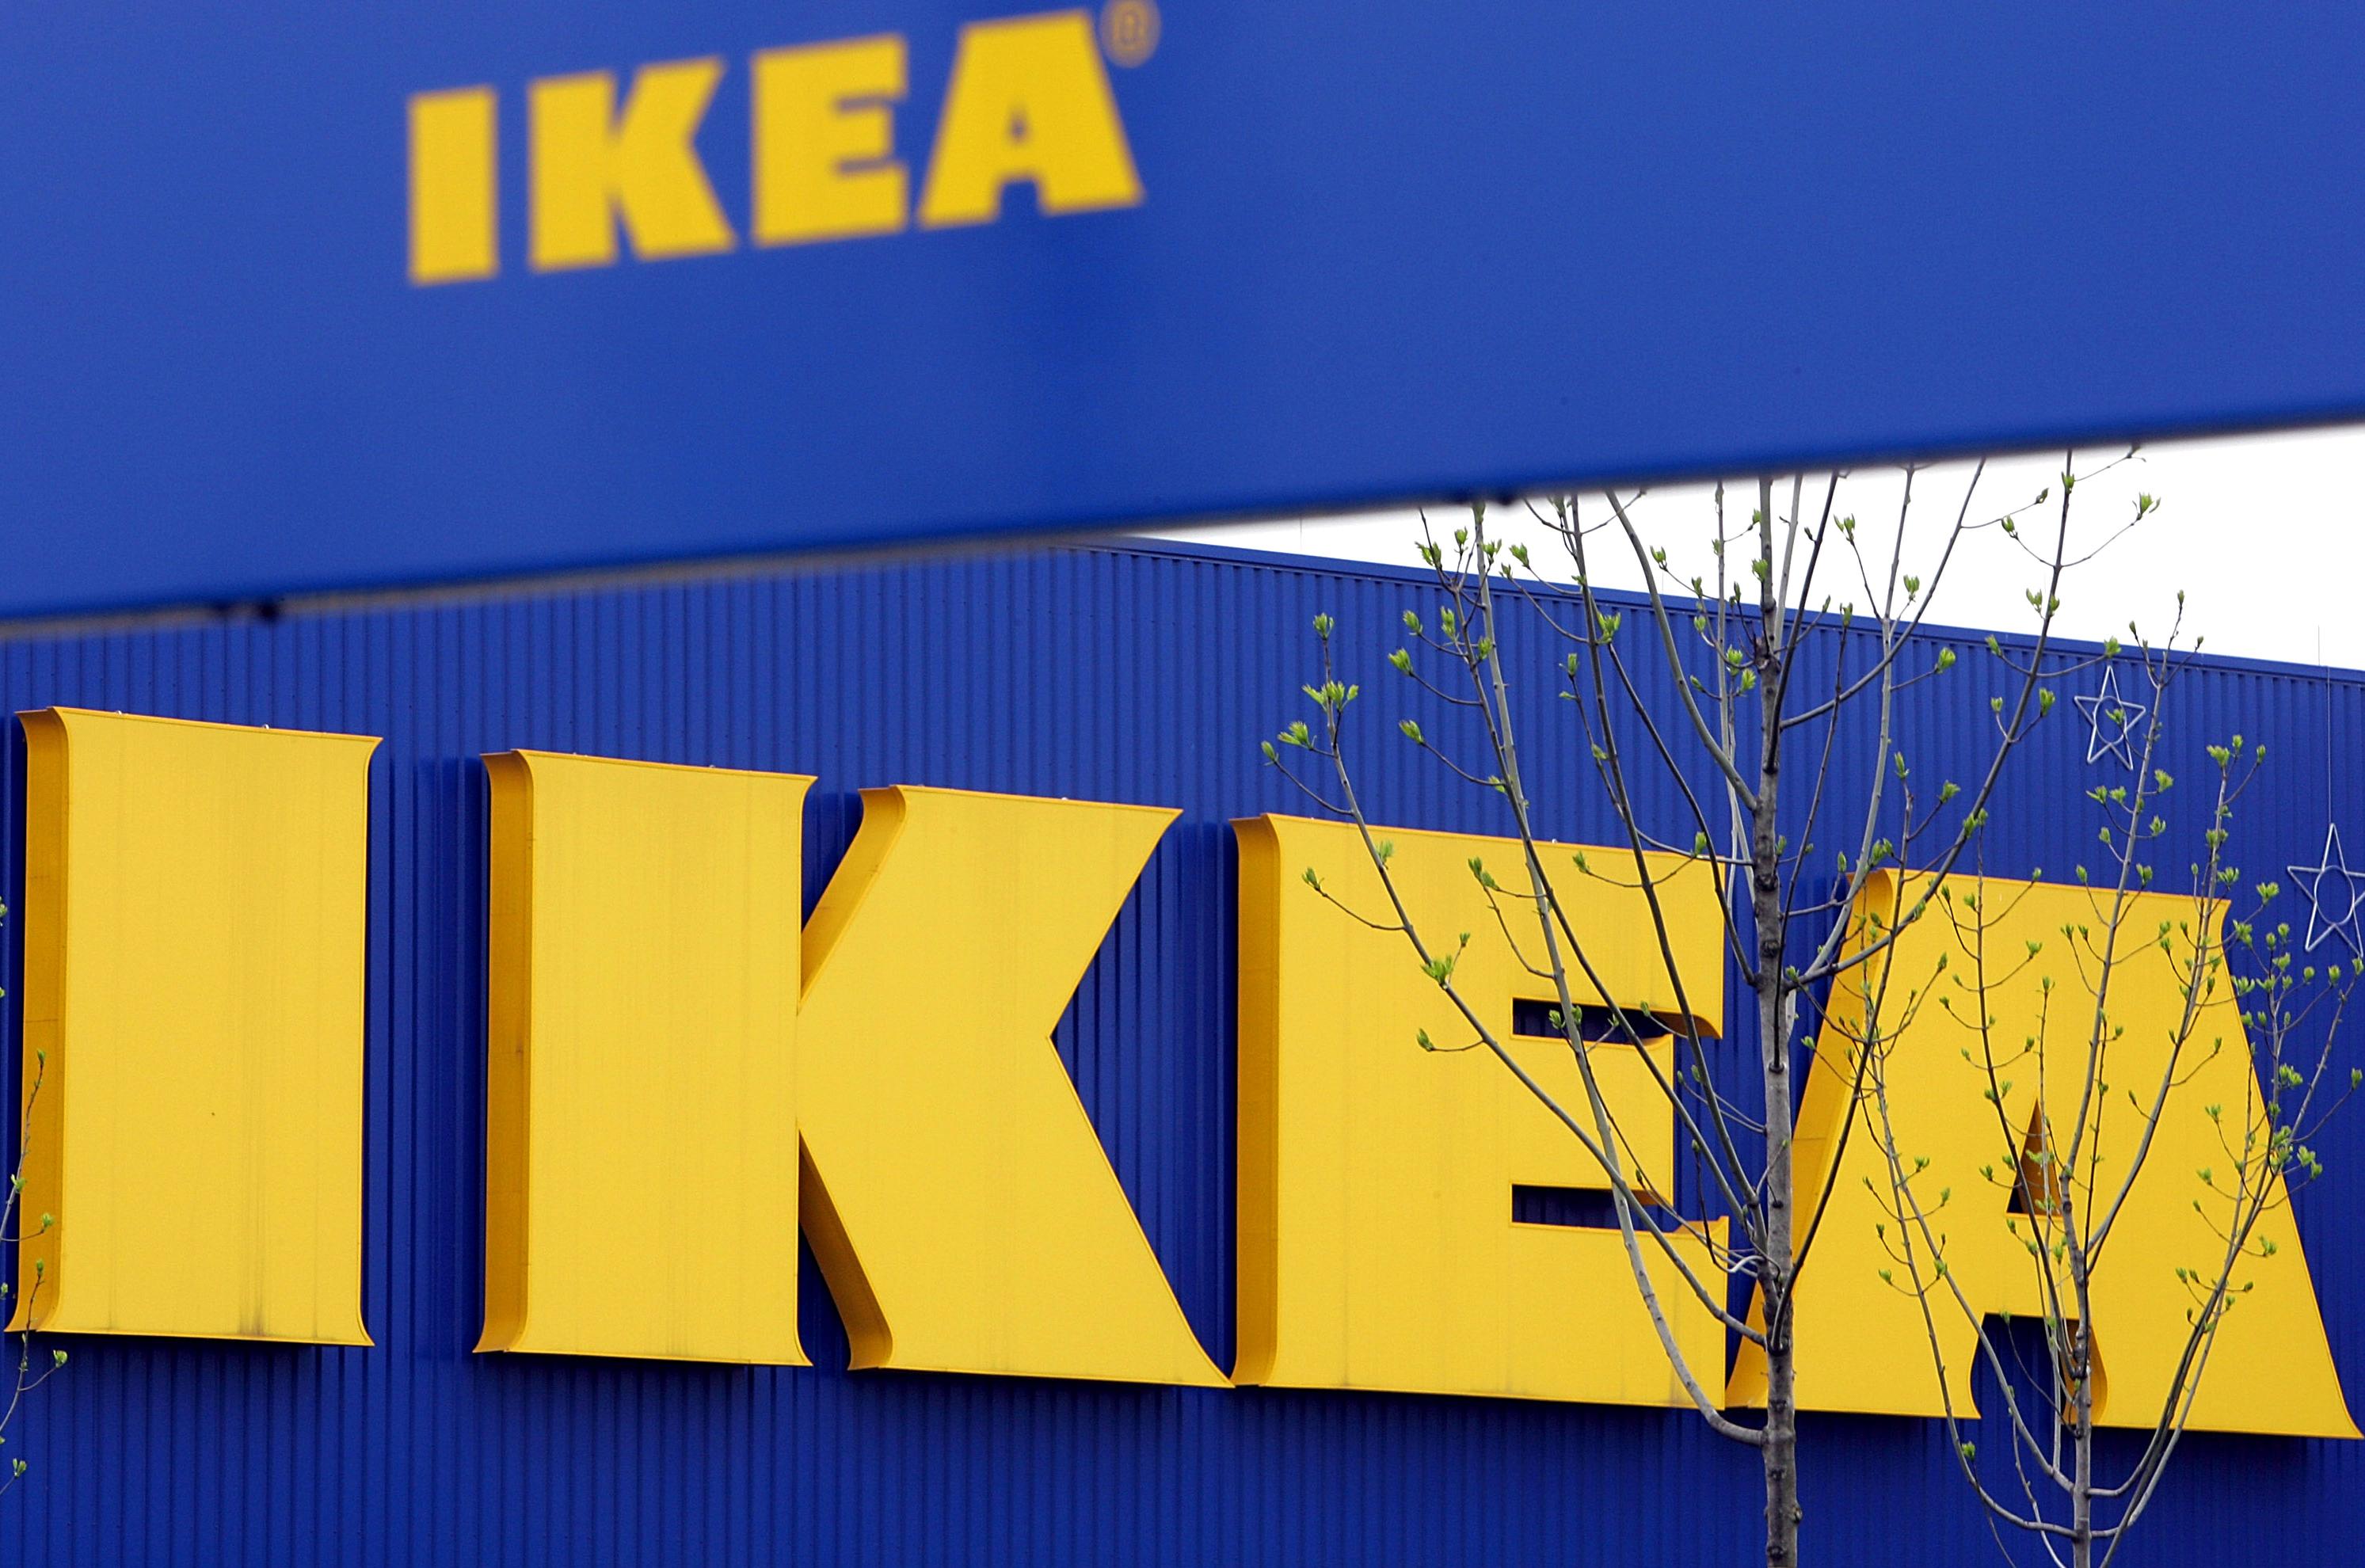 Ikea To Settle For 50 Million After Toppled Dressers Kill 3 Young